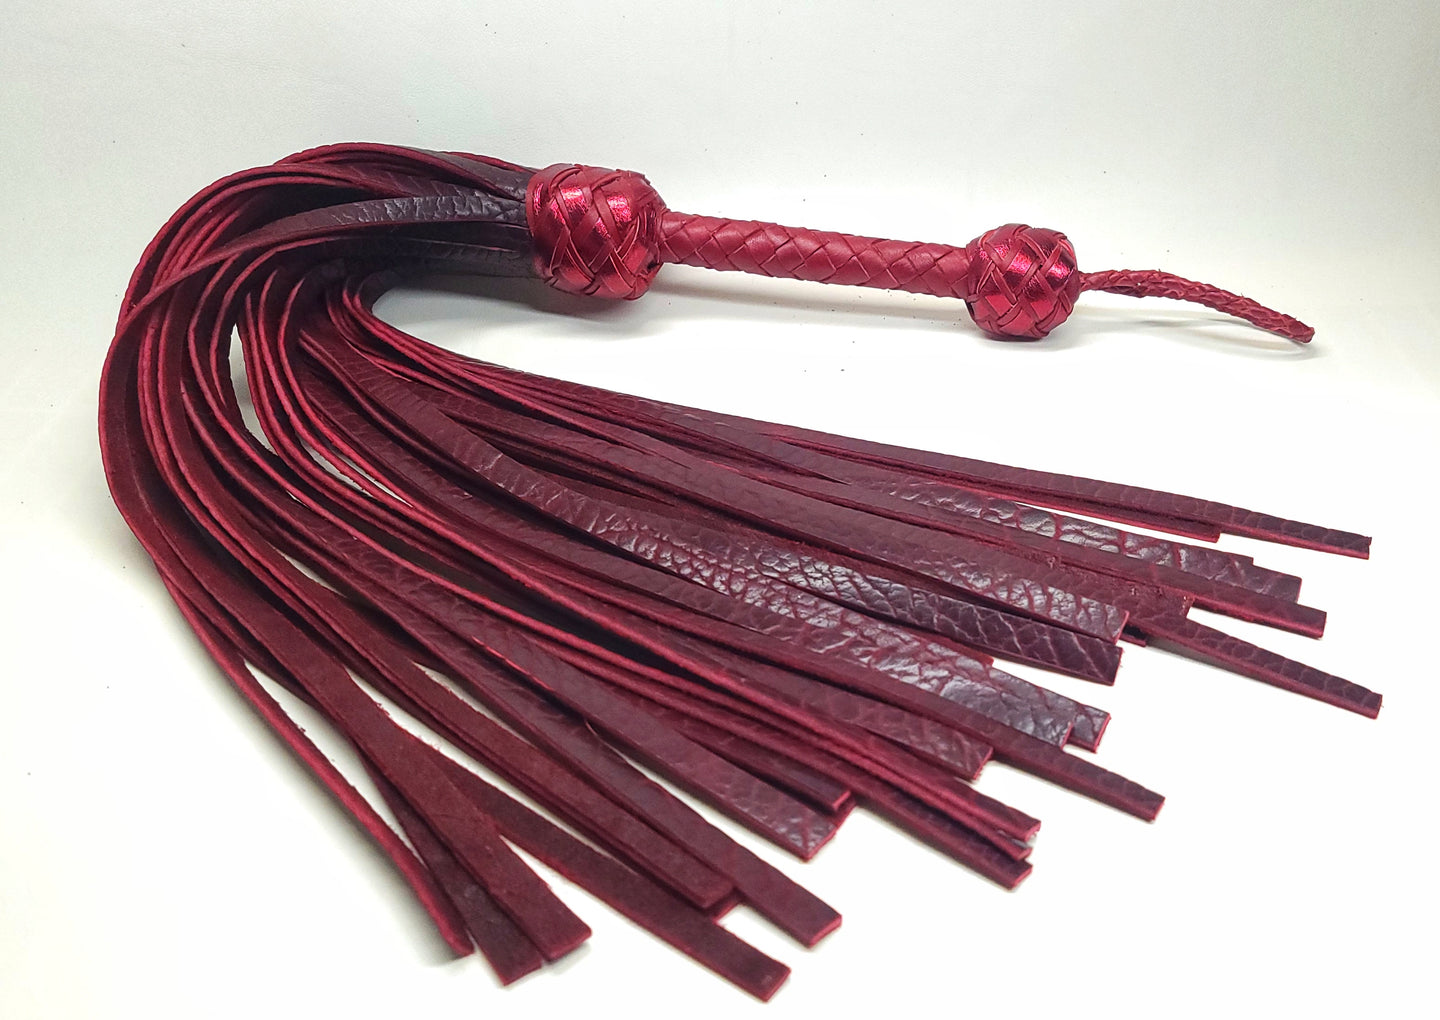 Black Cherry Bison- In Stock